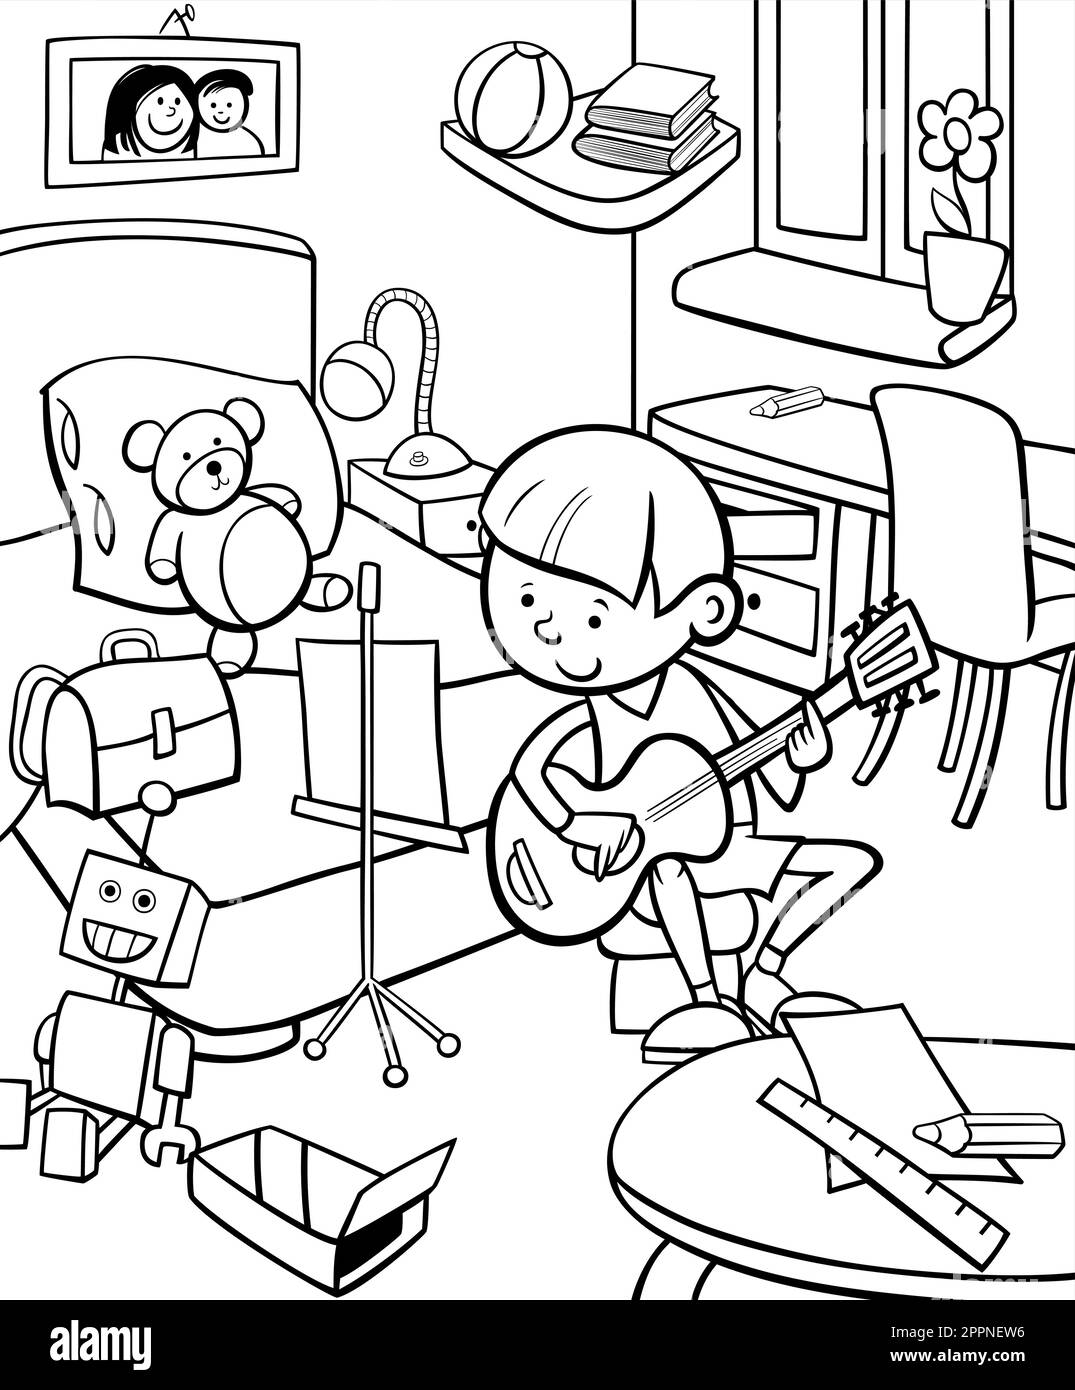 boy playing guitar in his room cartoon coloring page Stock Vector